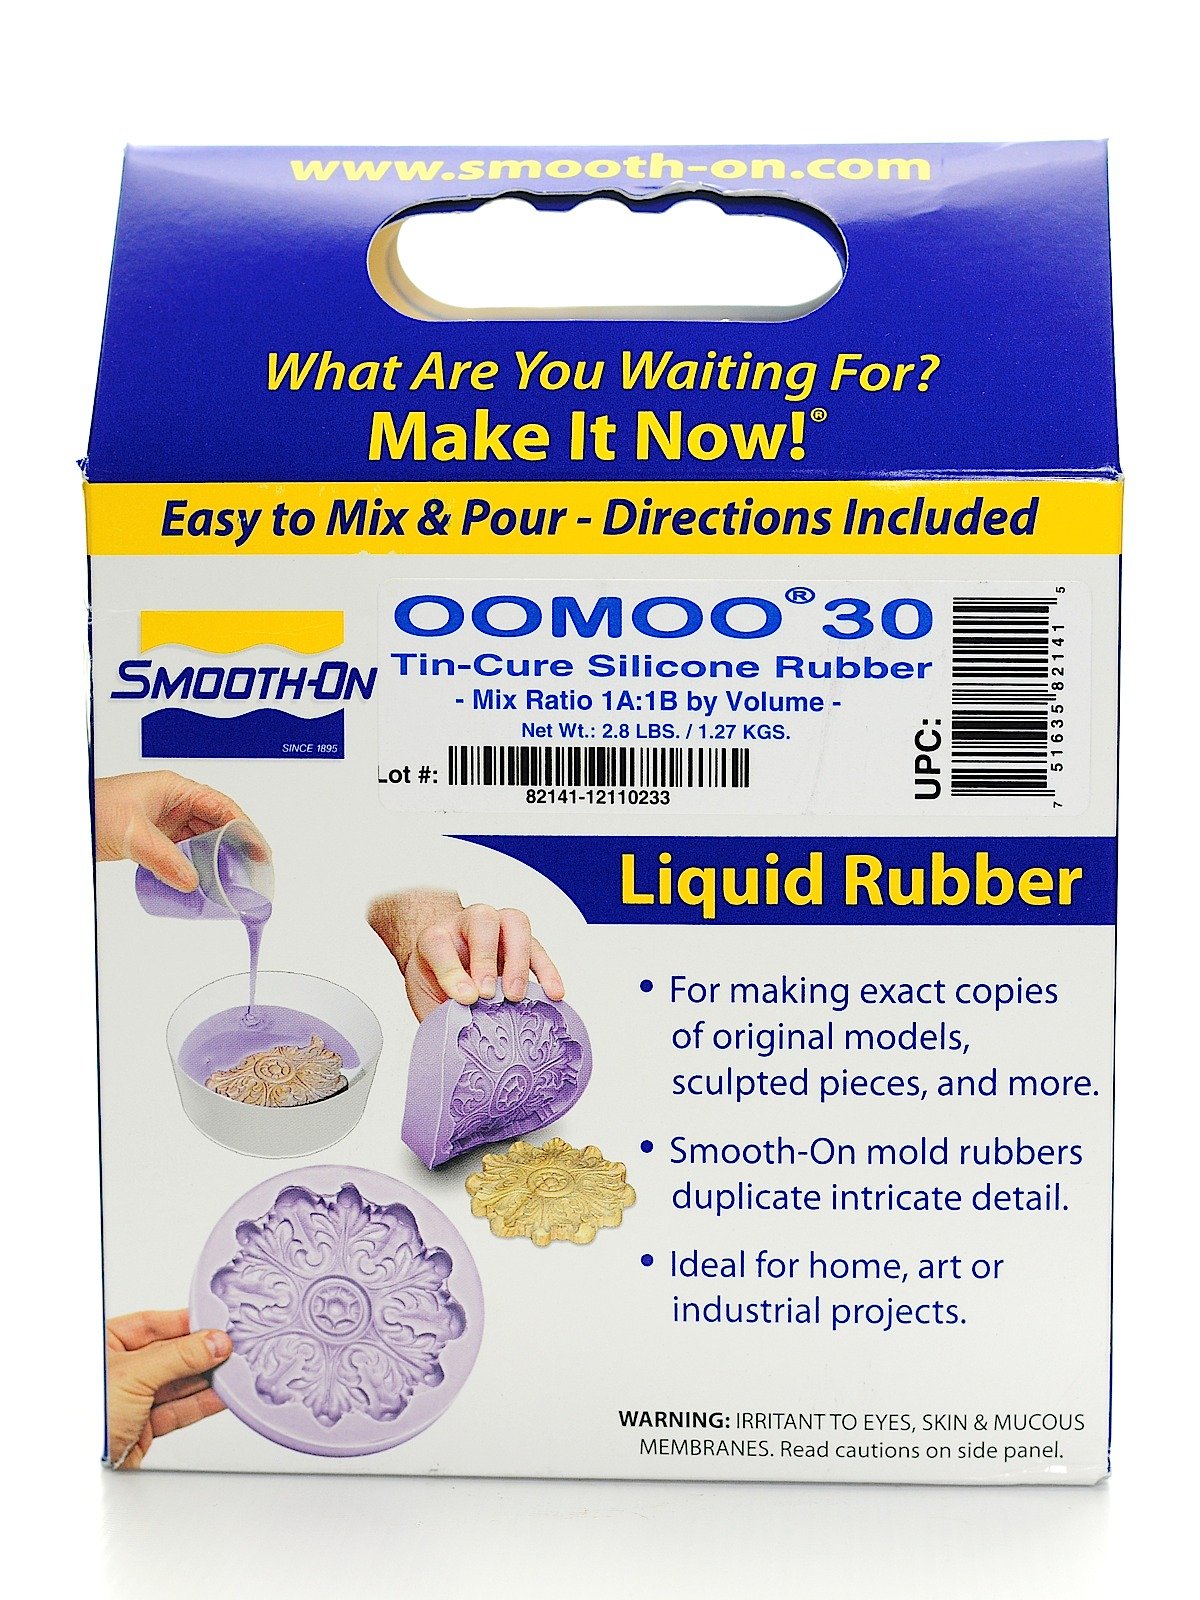 Smooth-On Silicone Mold Making, Liquid Rubber , Easy to Use